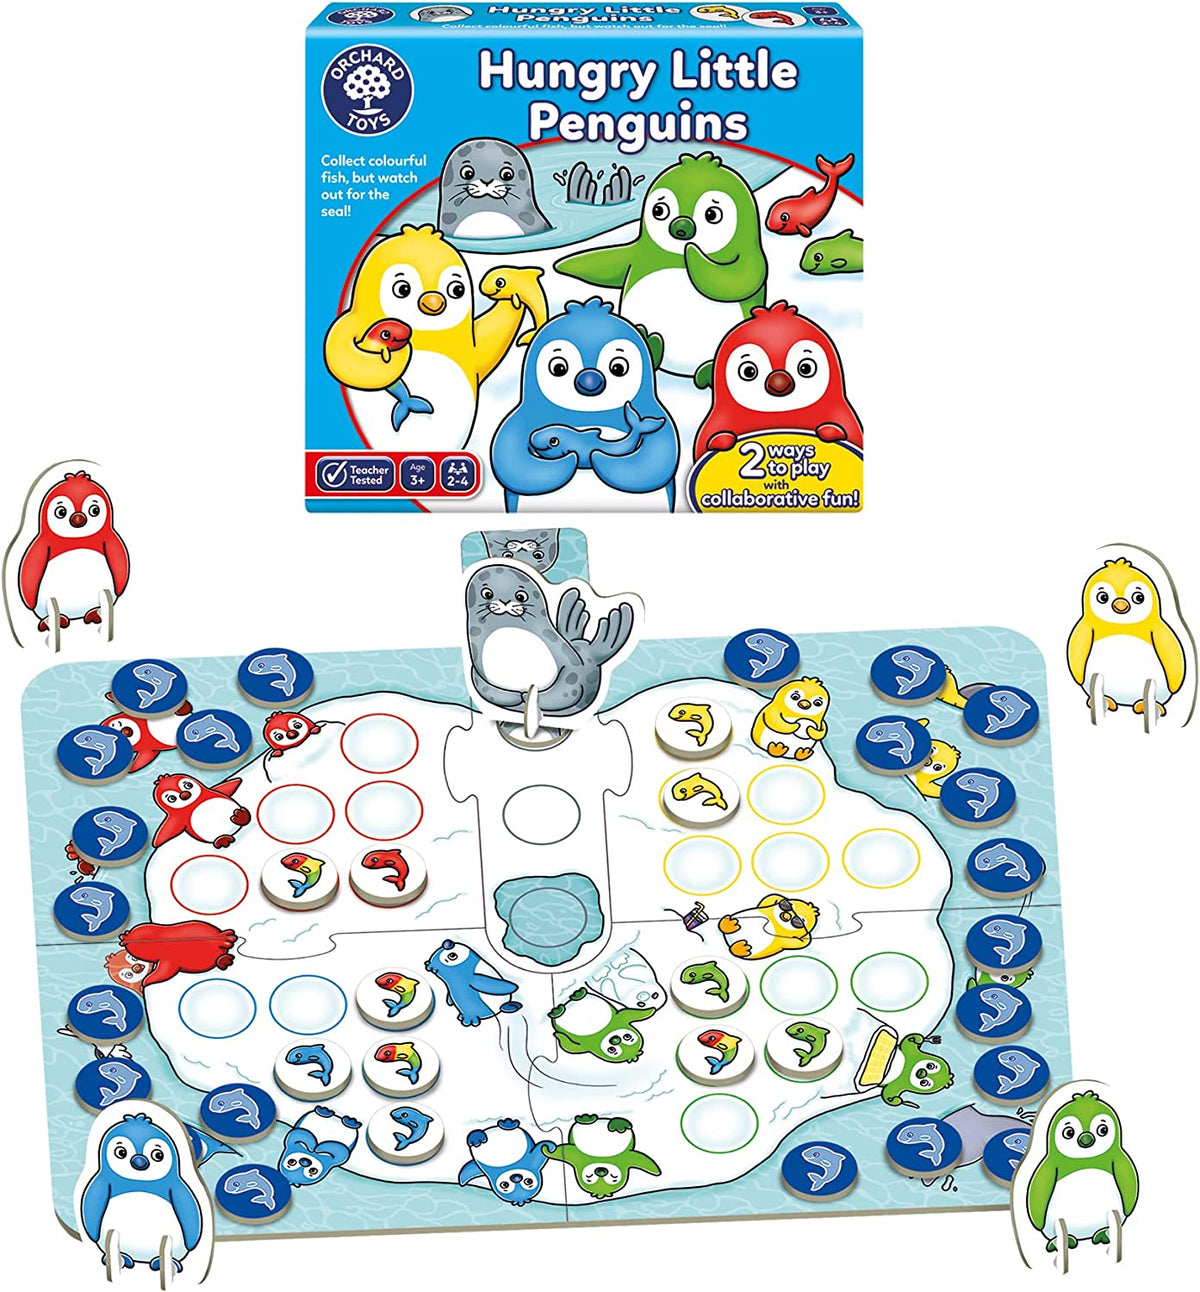 Orchard Toys - Hungry Little Penguins product image 4